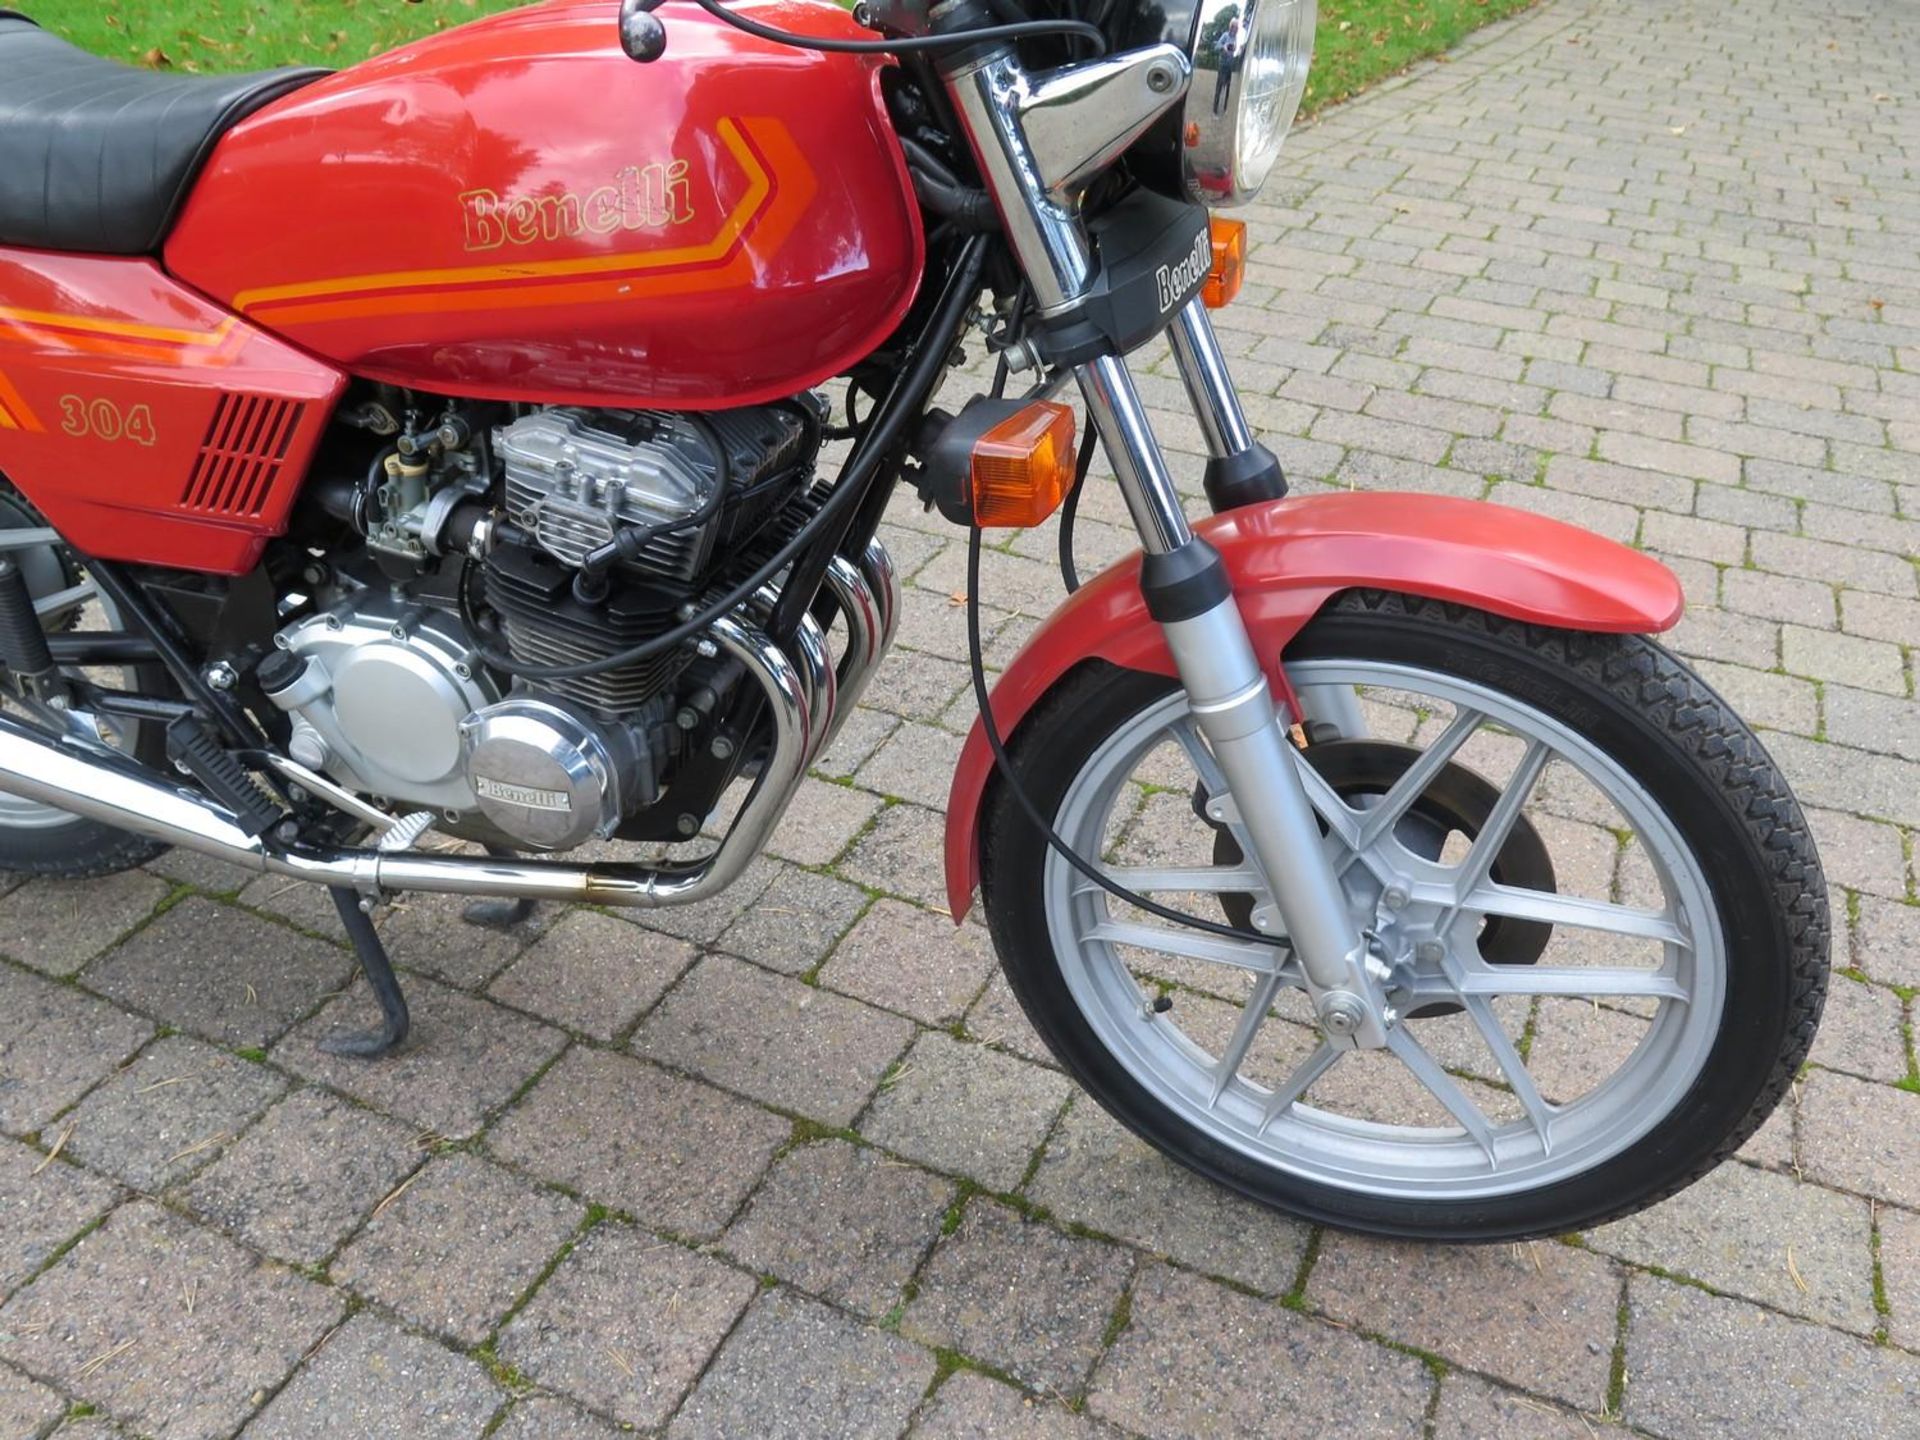 A 1983 Benelli 304 Frame number RO?10098 Engine number RH?6144 Mileage 8,074 Kms Original and - Image 7 of 8